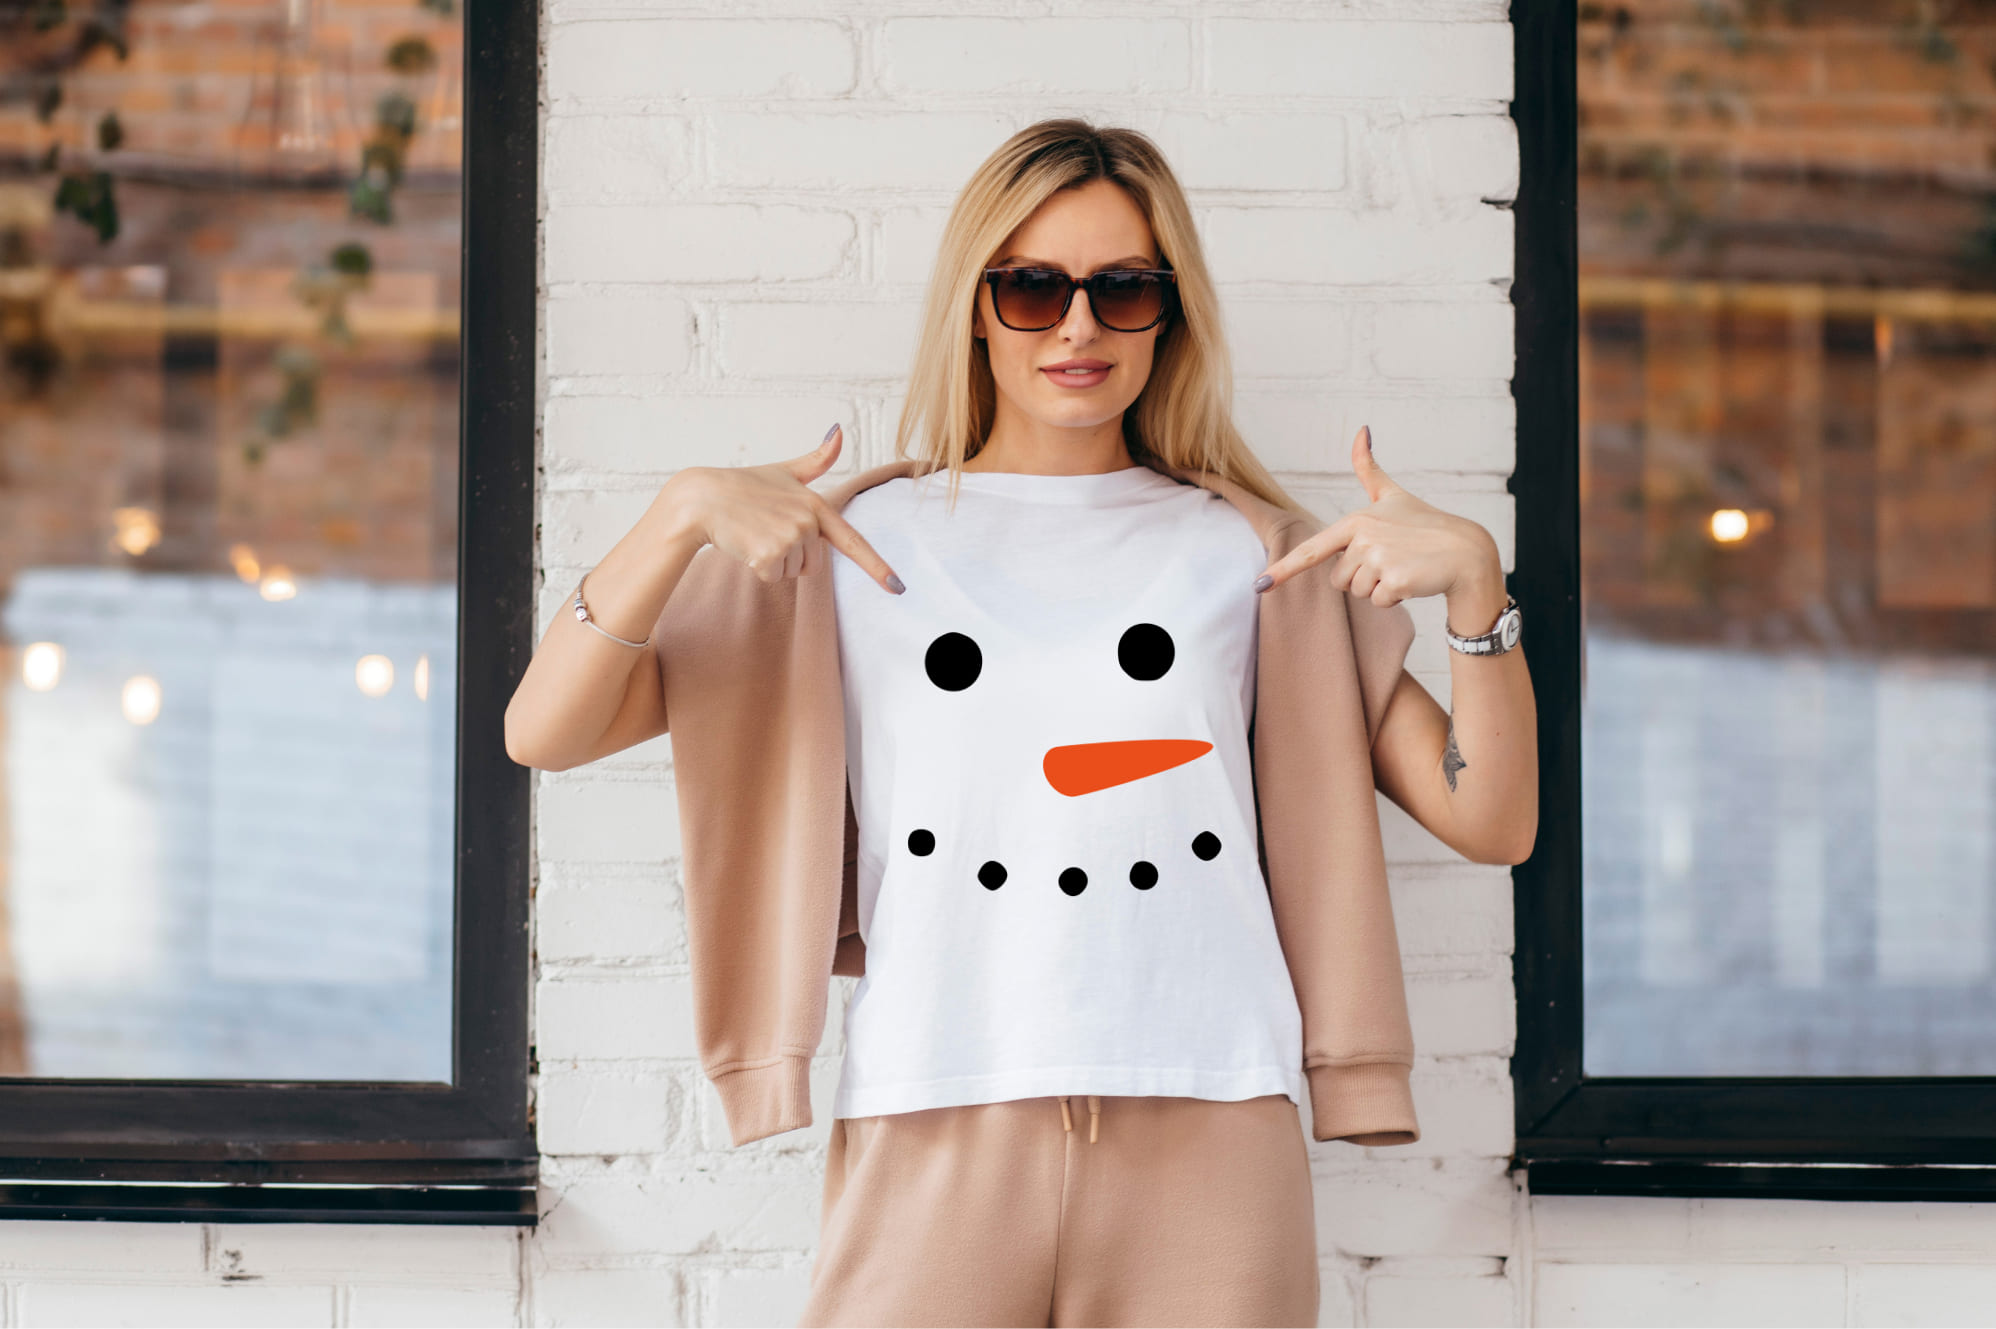 Funny minimalistic white t-shirt with the snowman shape.